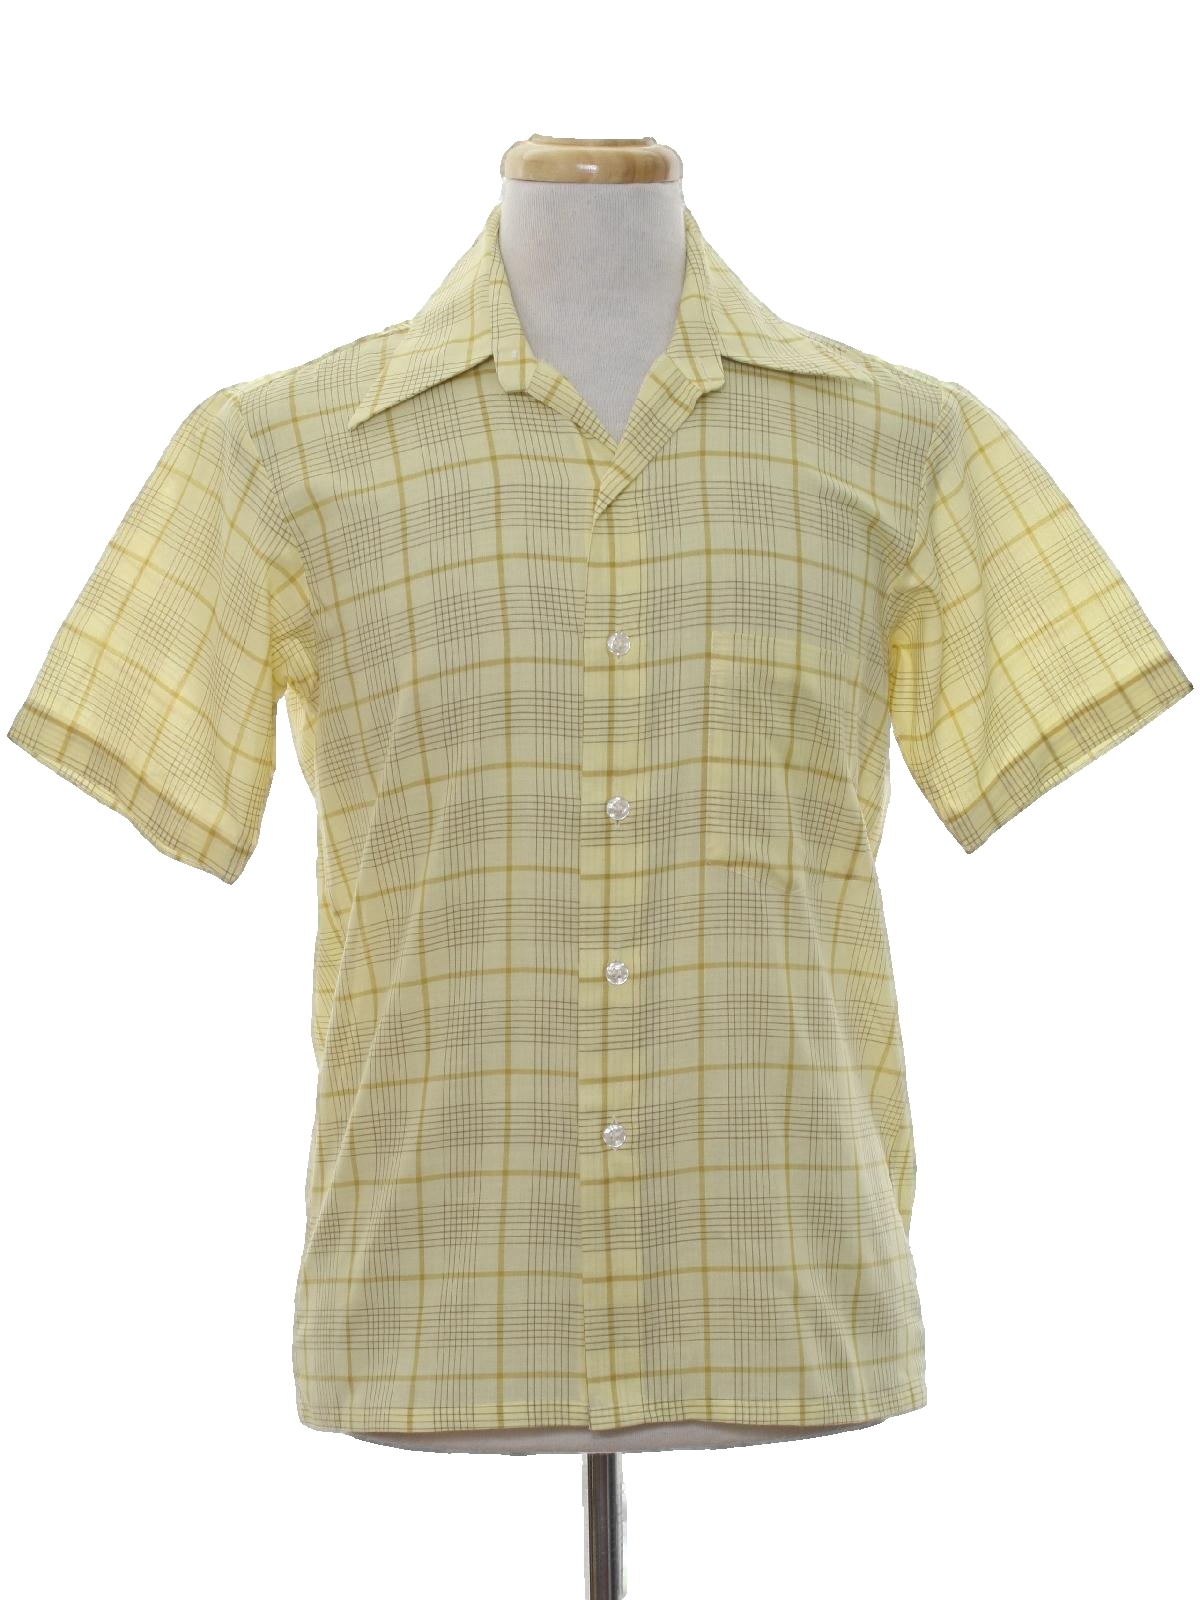 60's Vintage Shirt: 60s -Sears Perma Prest- Mens pale yellow background ...